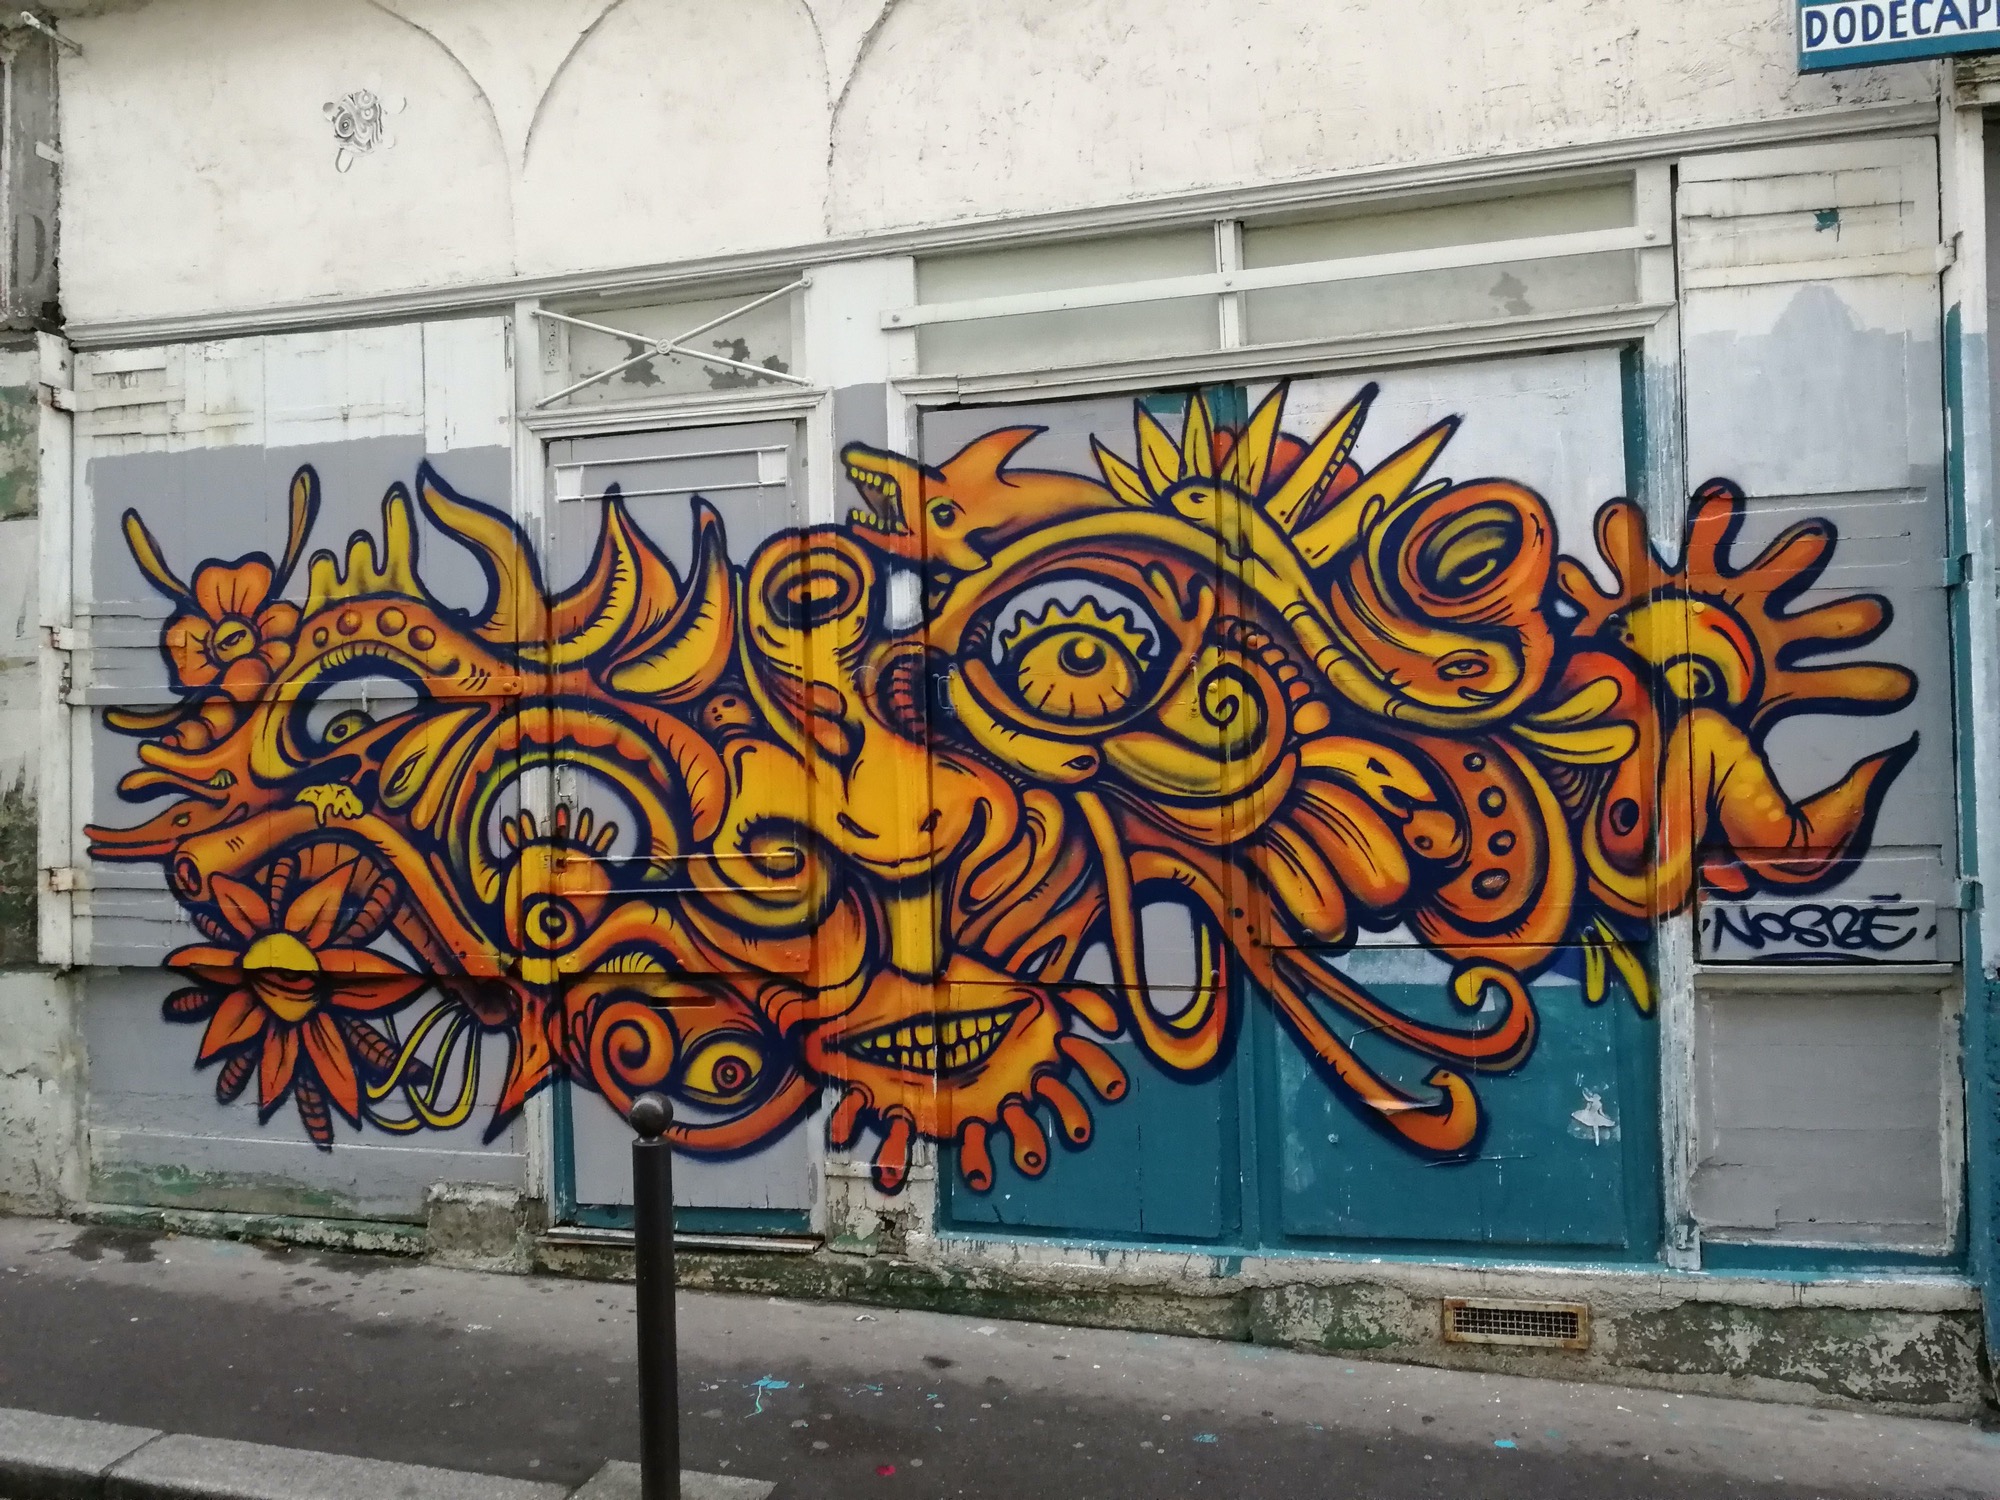 Graffiti 627  by the artist Nosbe captured by Rabot in Paris France